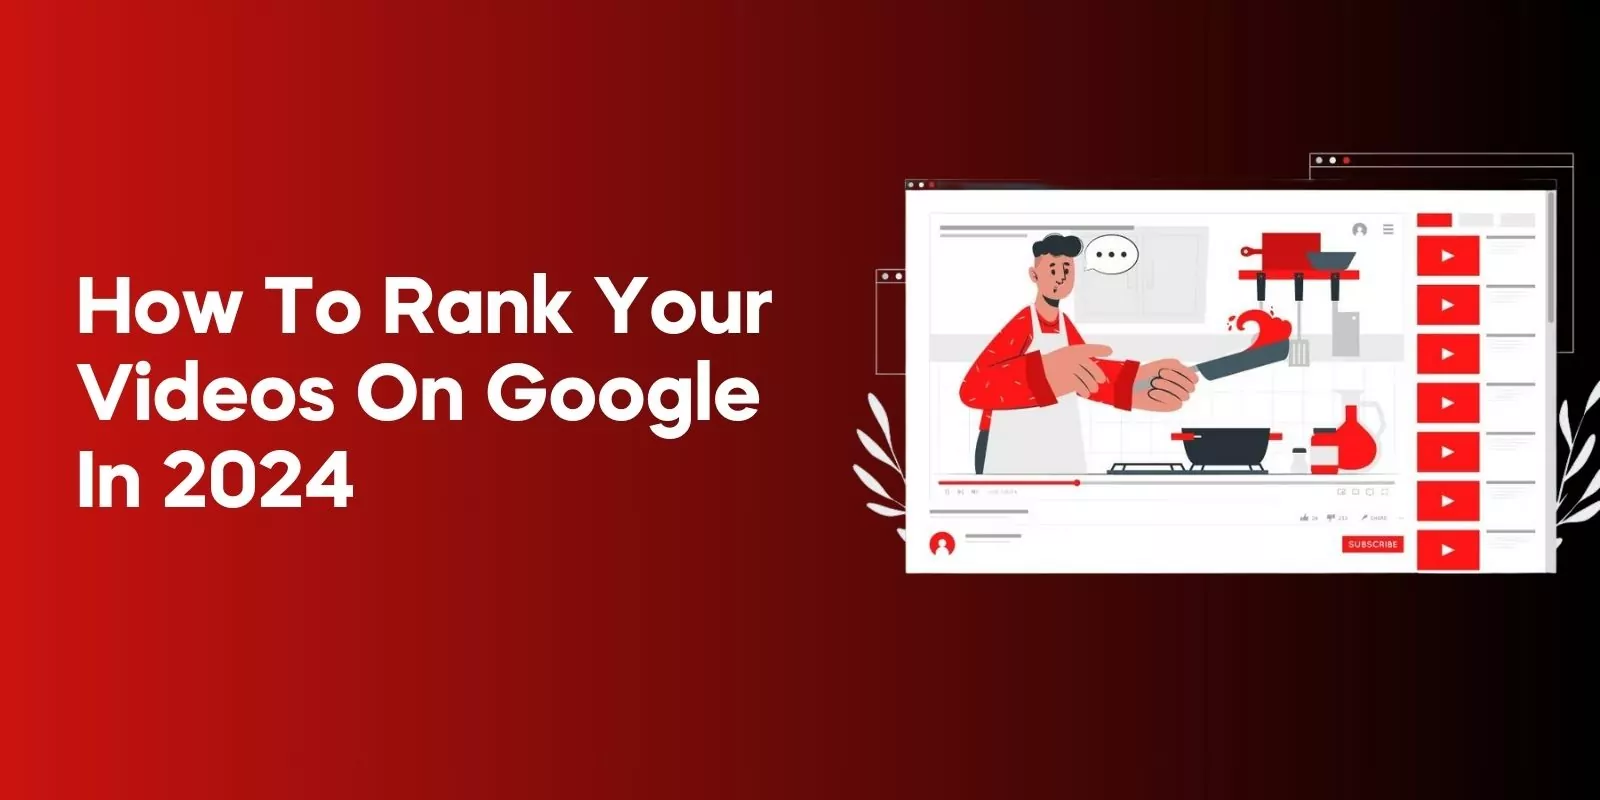 How to Rank Your Videos on Google in 2024